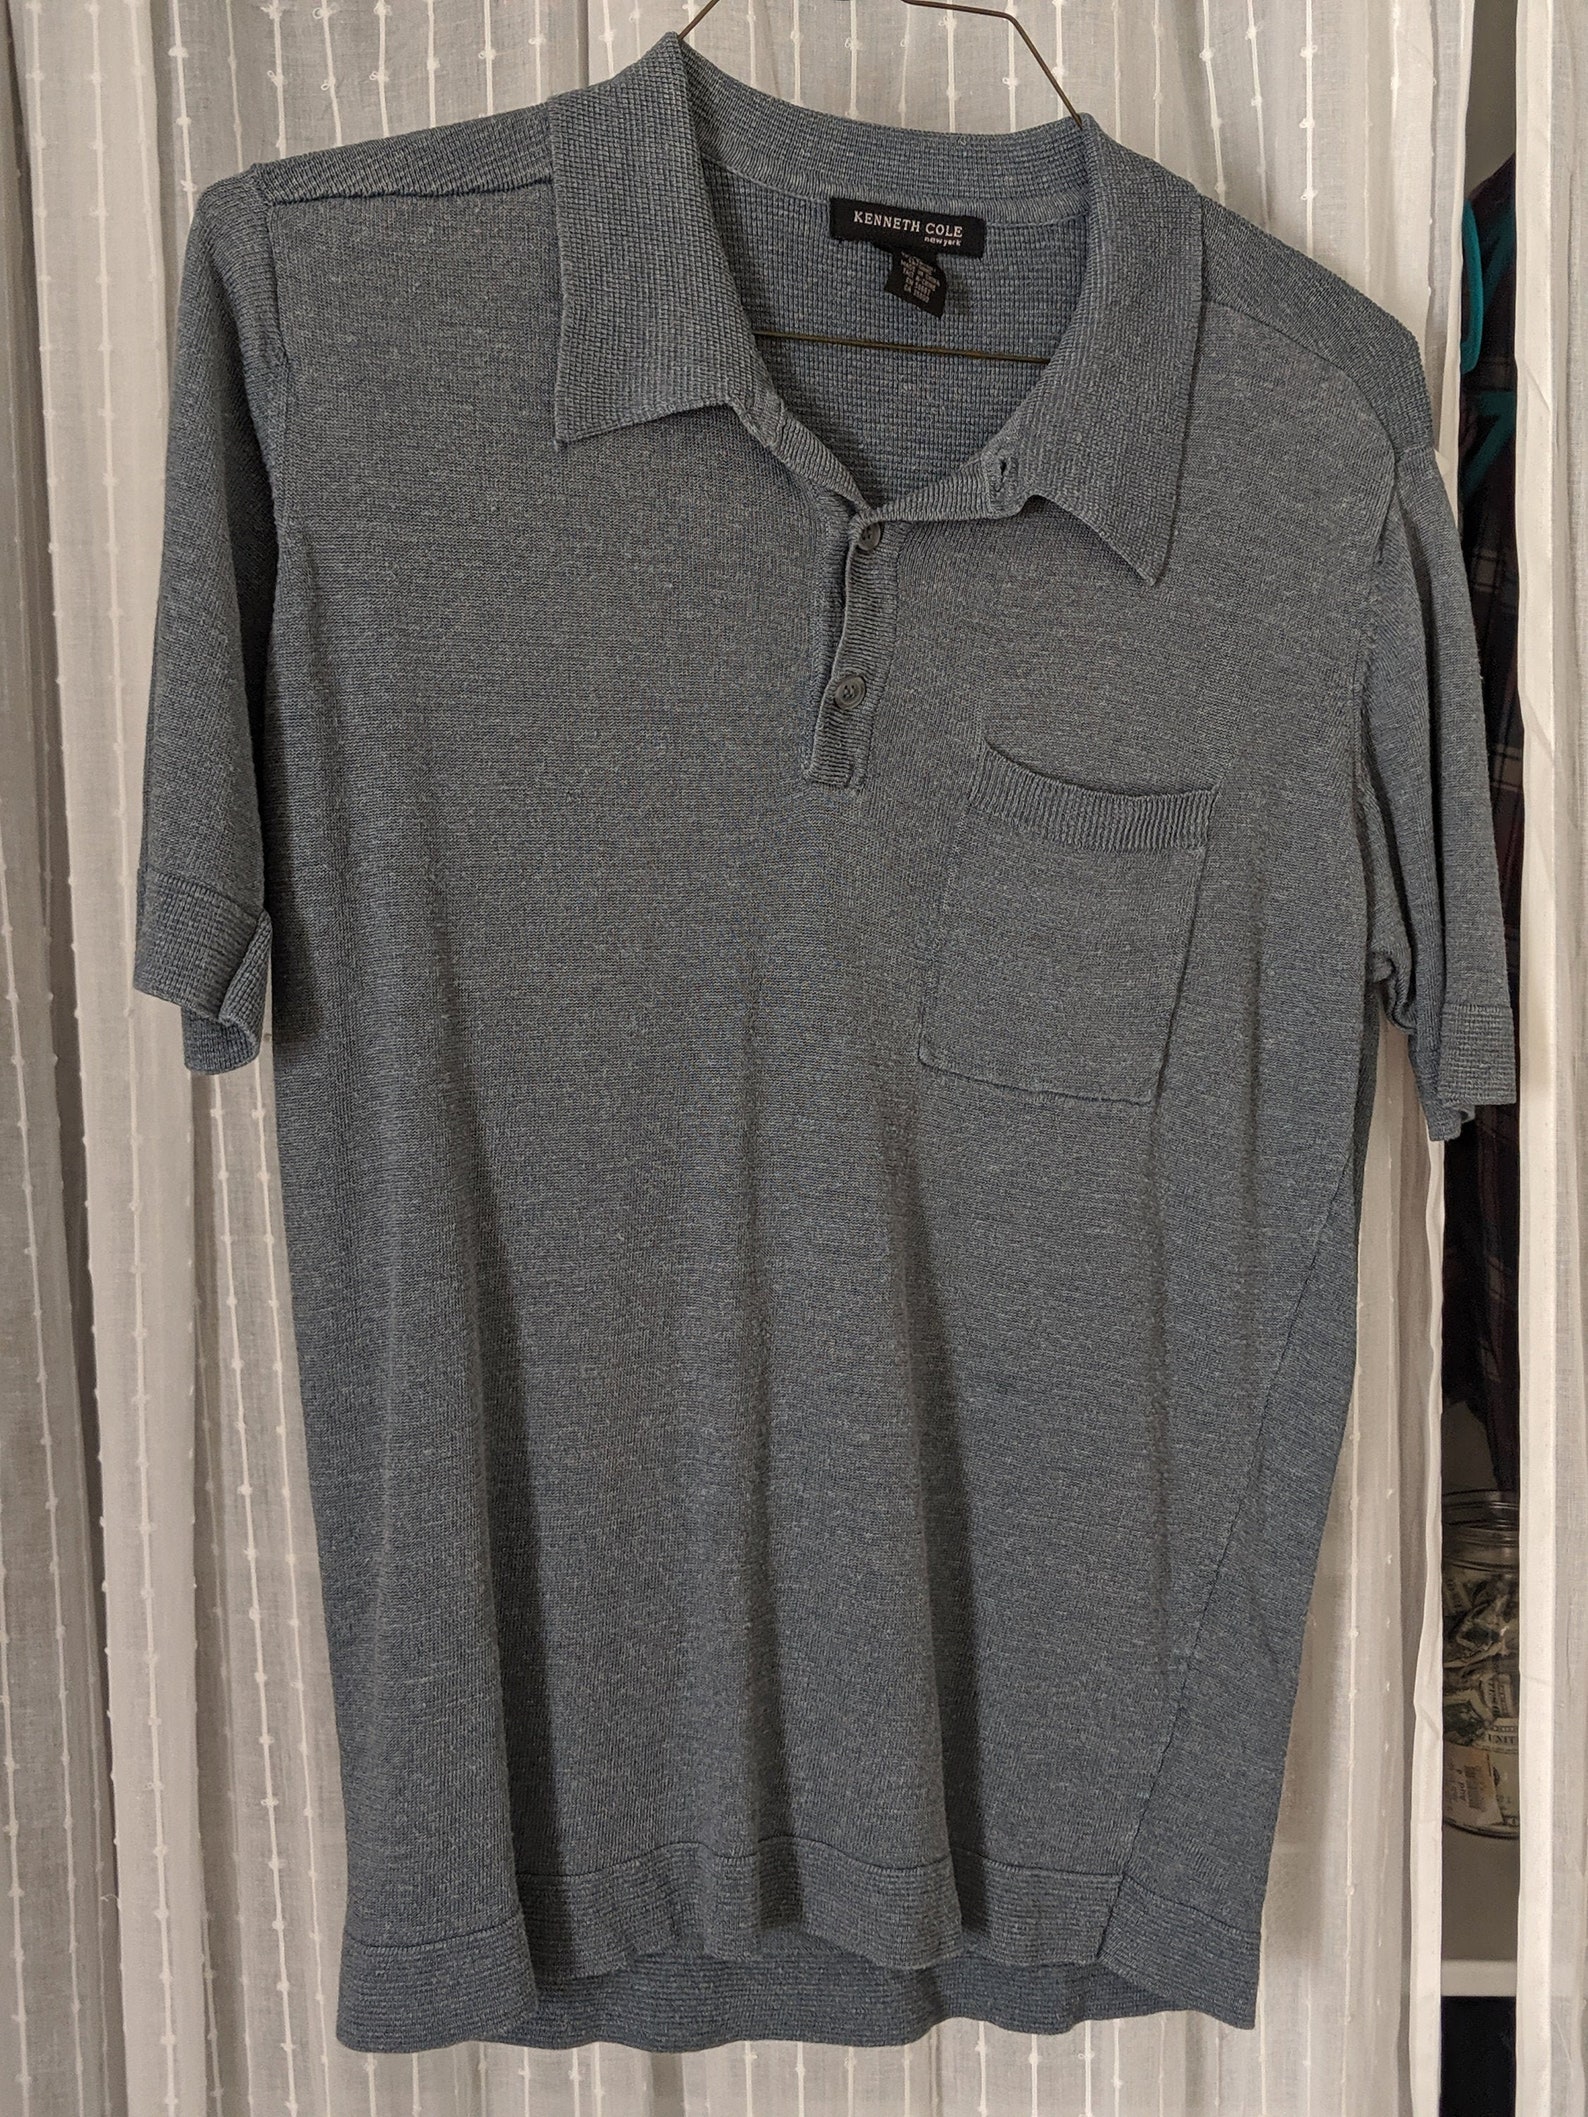 Kenneth Cole gray knit golf shirt w pocket size Med great | Etsy